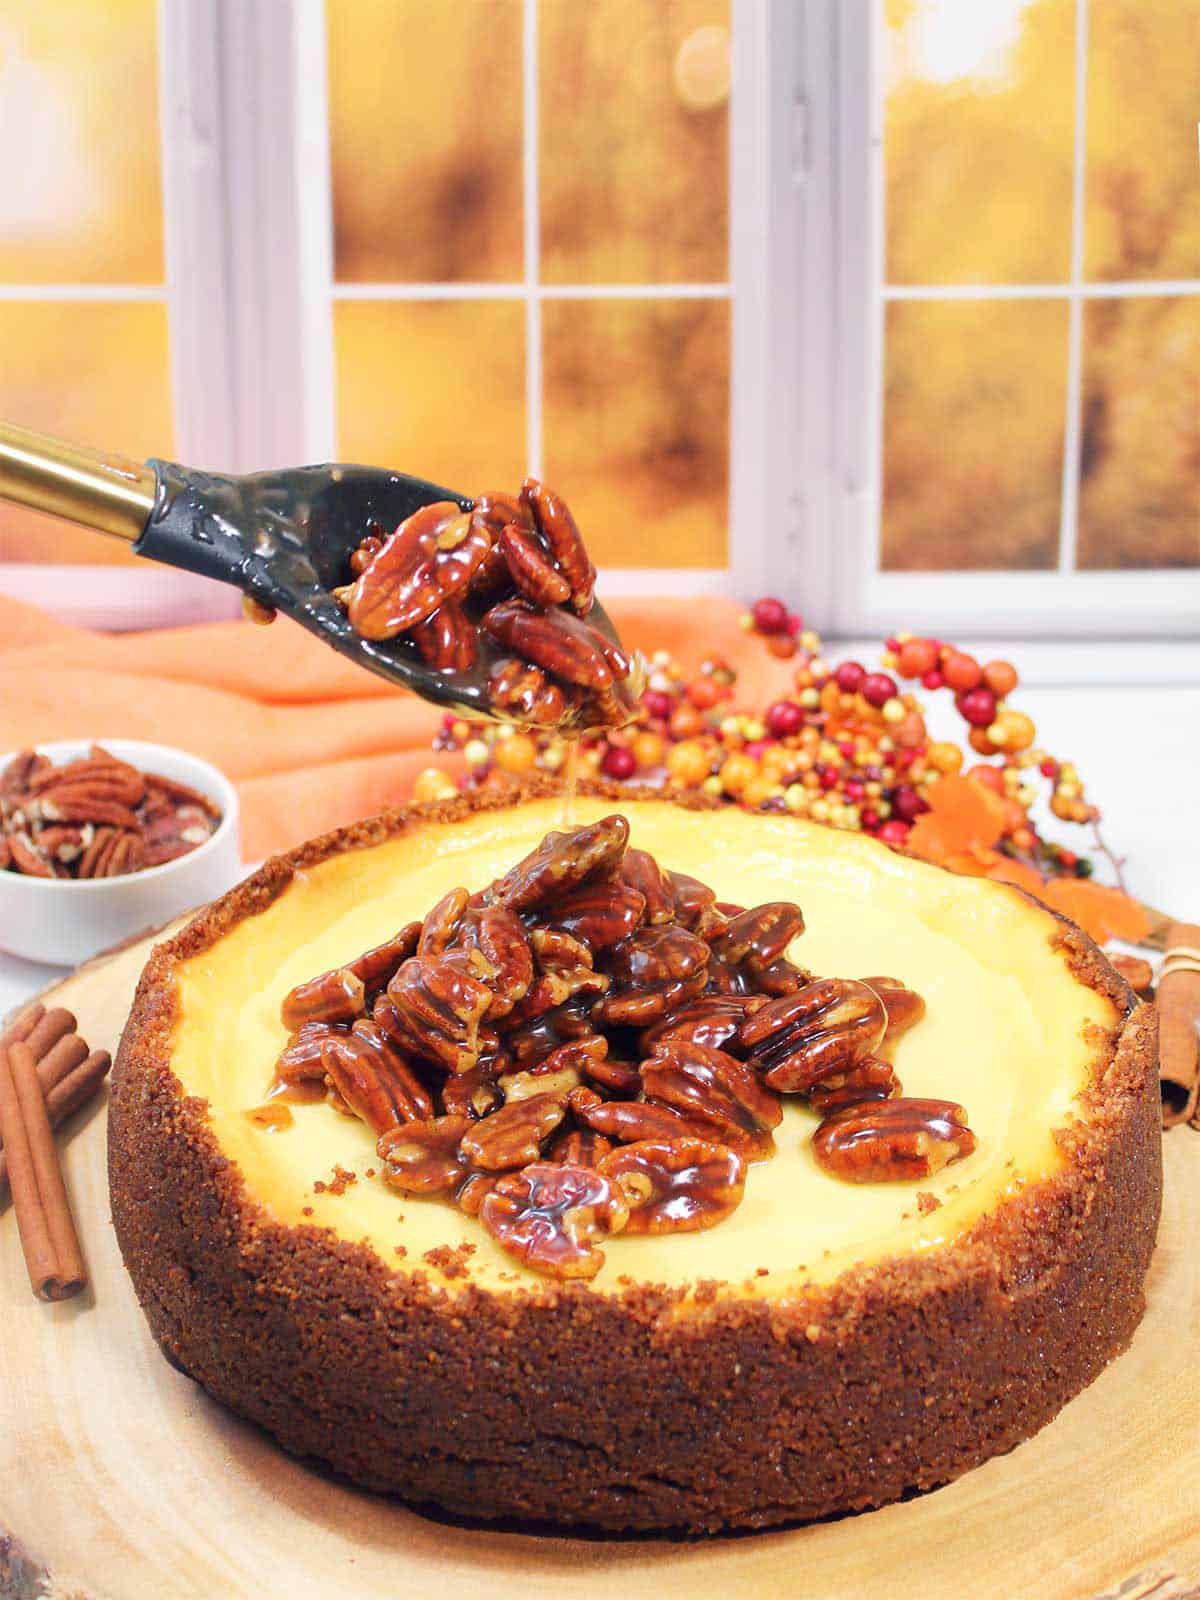 Spooning pecan pie topping on cheesecake.